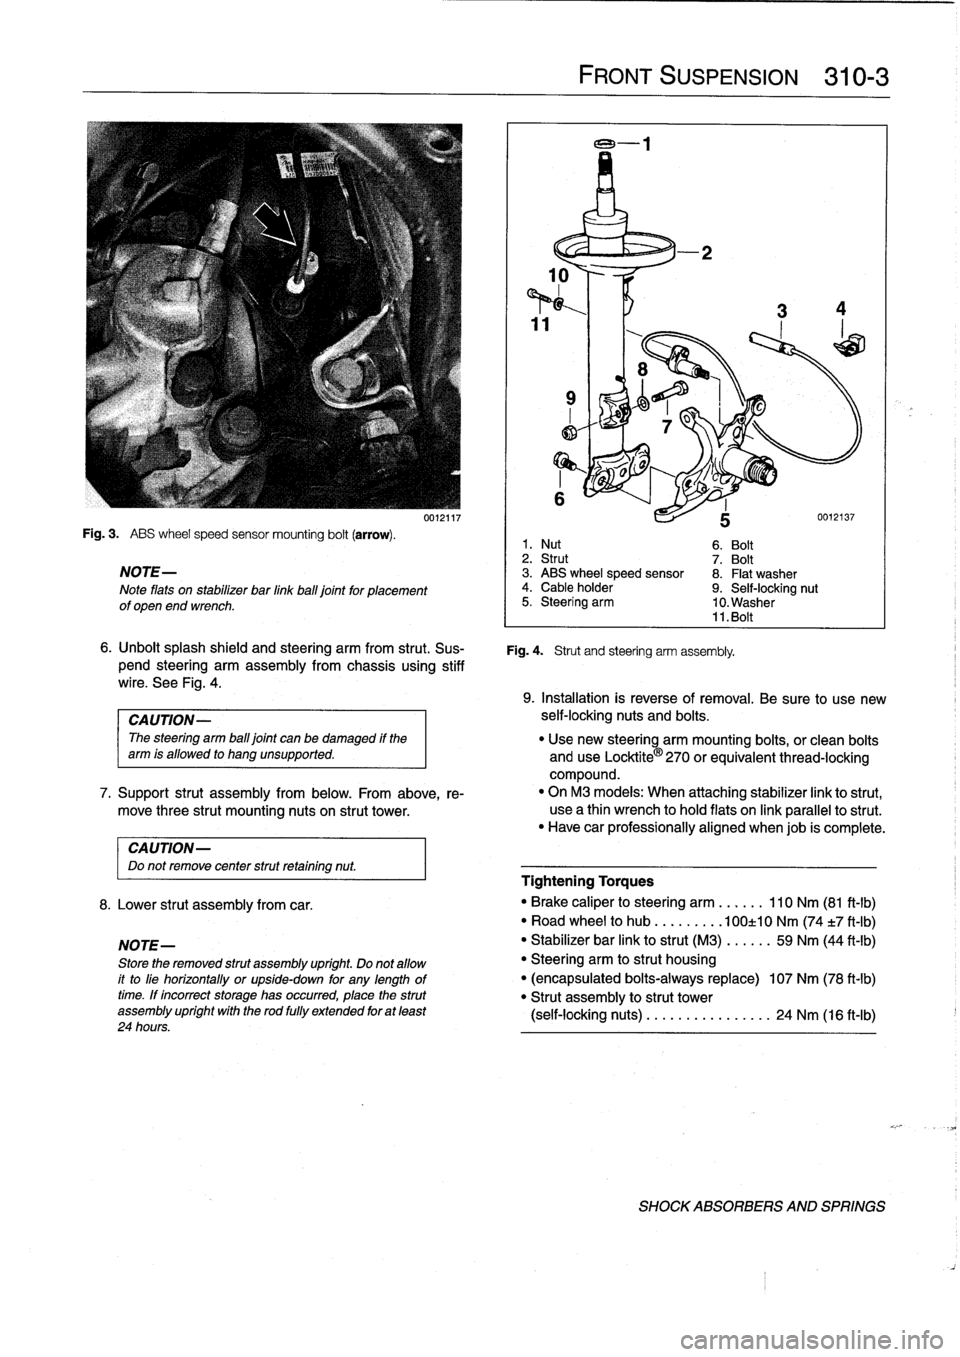 BMW 318i 1997 E36 Workshop Manual 
Fig
.
3
.

	

ABS
wheel
speed
sensor
mounting
bolt
(arrow)
.

NOTE-

Note
flats
on
stabilizer
bar
linkball
joint
for
placement
of
open
end
wrench
.

CAUTION-
Do
not
remove
center
strut
retaining
nut
